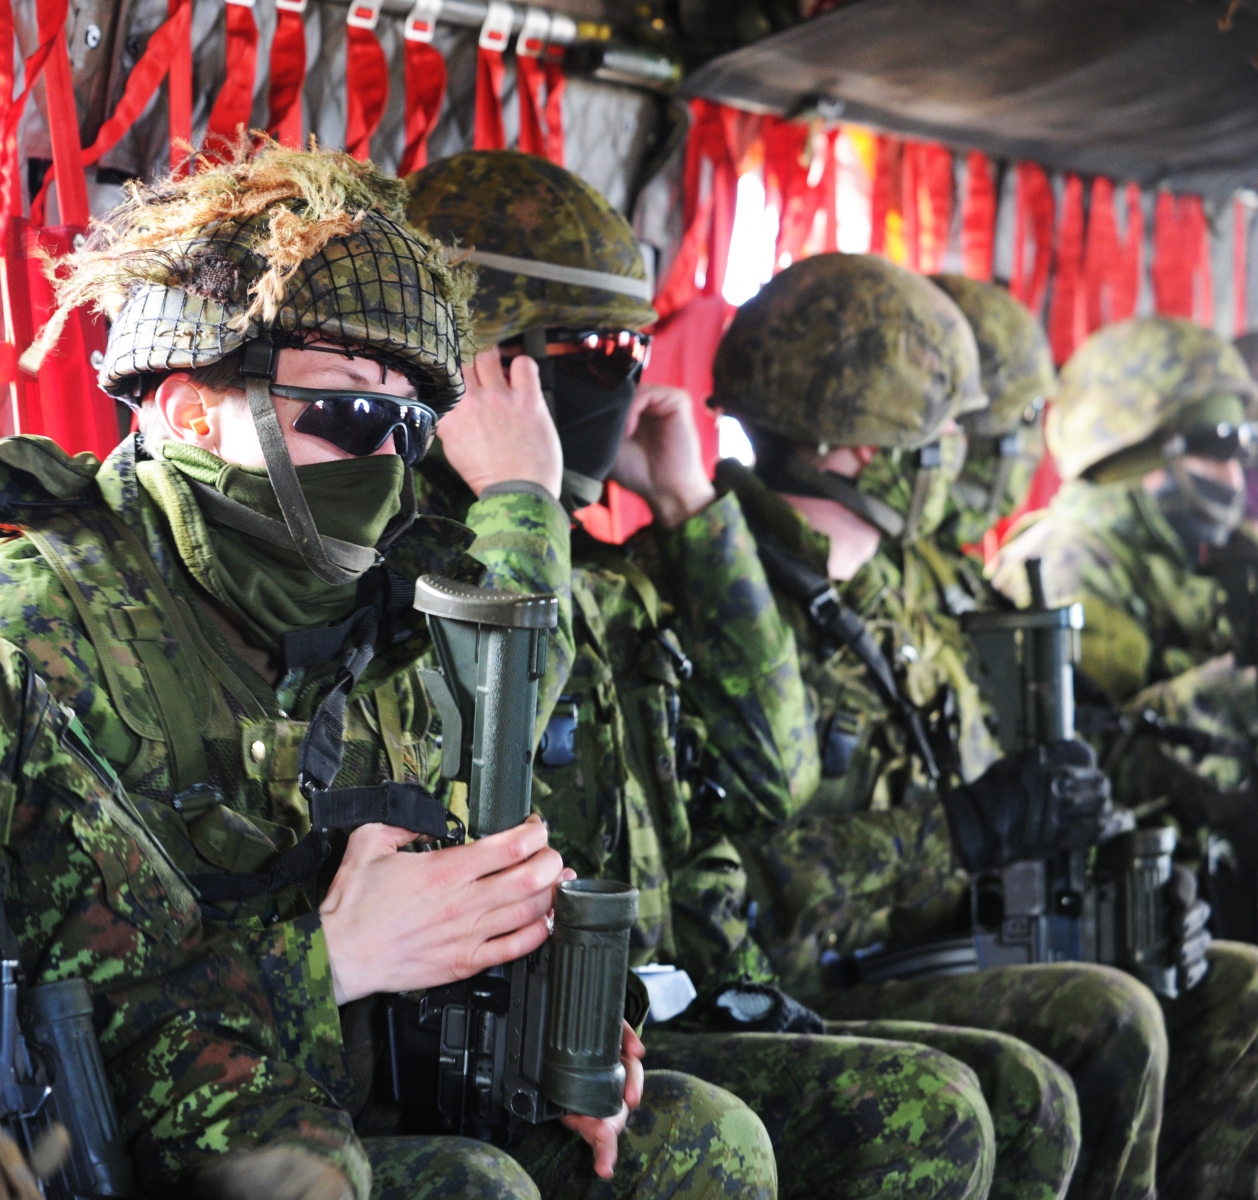 Members of the Canadian Army Reserve and Royal Canadian Air Force  participated in Exercise AUTUMN GUNNER on October 17, 2020 at 4th Canadian Division Training Centre in Meaford, Ontario. Imagery: Lt(N) Andrew McLaughlin, Public Affairs Officer, 31 Canadian Brigade Group/Department of National Defence (2020). LX07-2020-017 // Des membres de la Réserve de l’Armée canadienne et de l’Aviation royale du Canada ont participé à l’exercice AUTUMN GUNNER le 17 octobre 2020 au Centre d’entraînement de la 4e Division canadienne à Meaford, en Ontario. Photos : Ltv Andrew McLaughlin, officier des affaires publiques, 31 Groupe-brigade du Canada/ministère de la Défense nationale (2020). LX07-2020-017